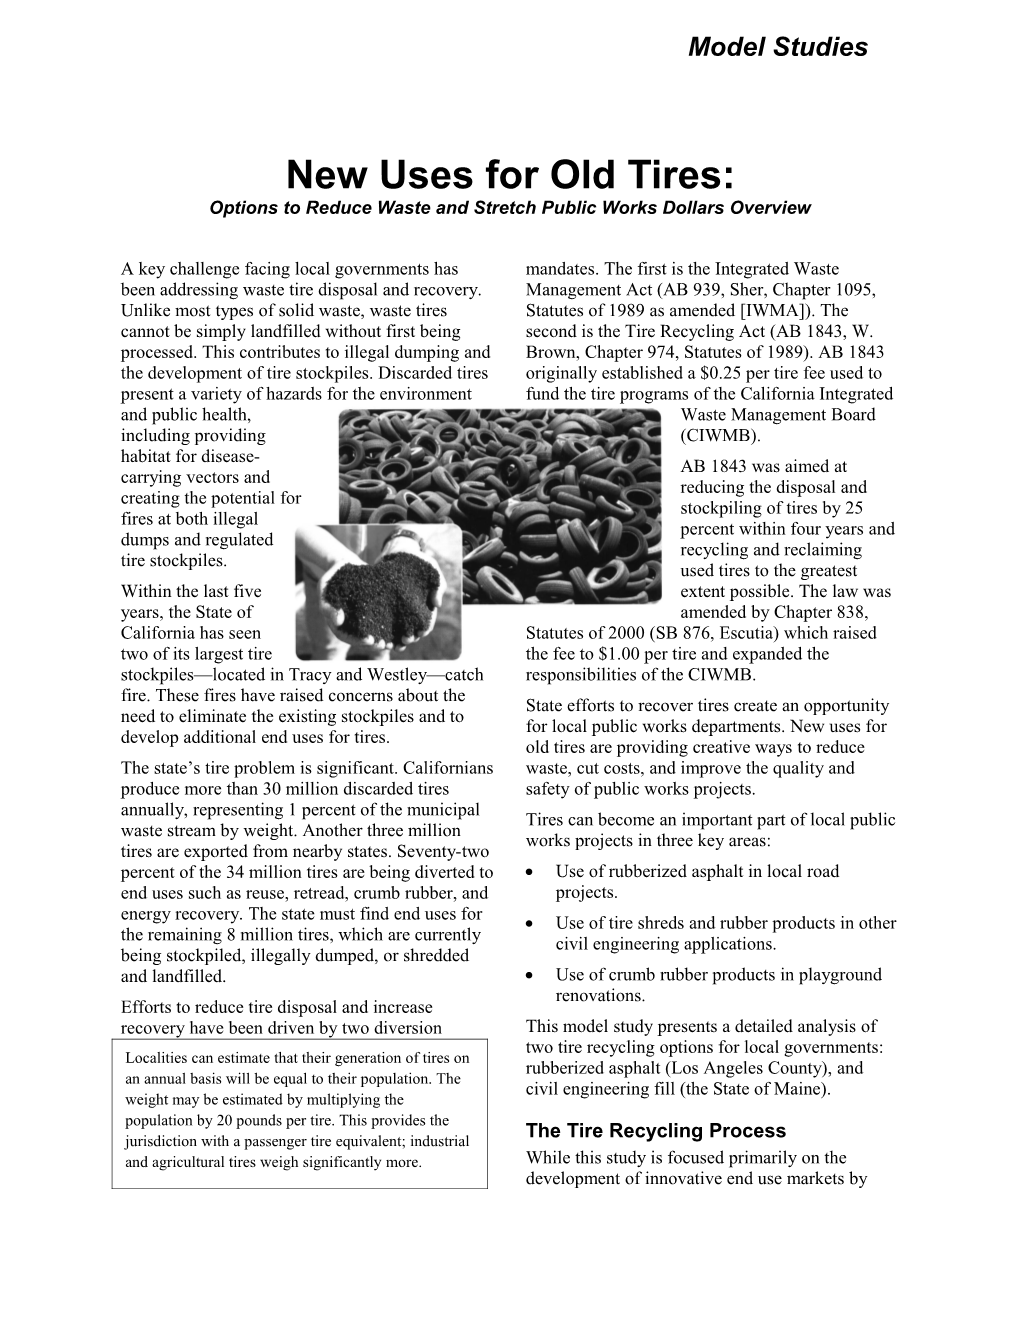 New Uses for Old Tires: Options to Reduce Waste and Stretch Public Works Dollars